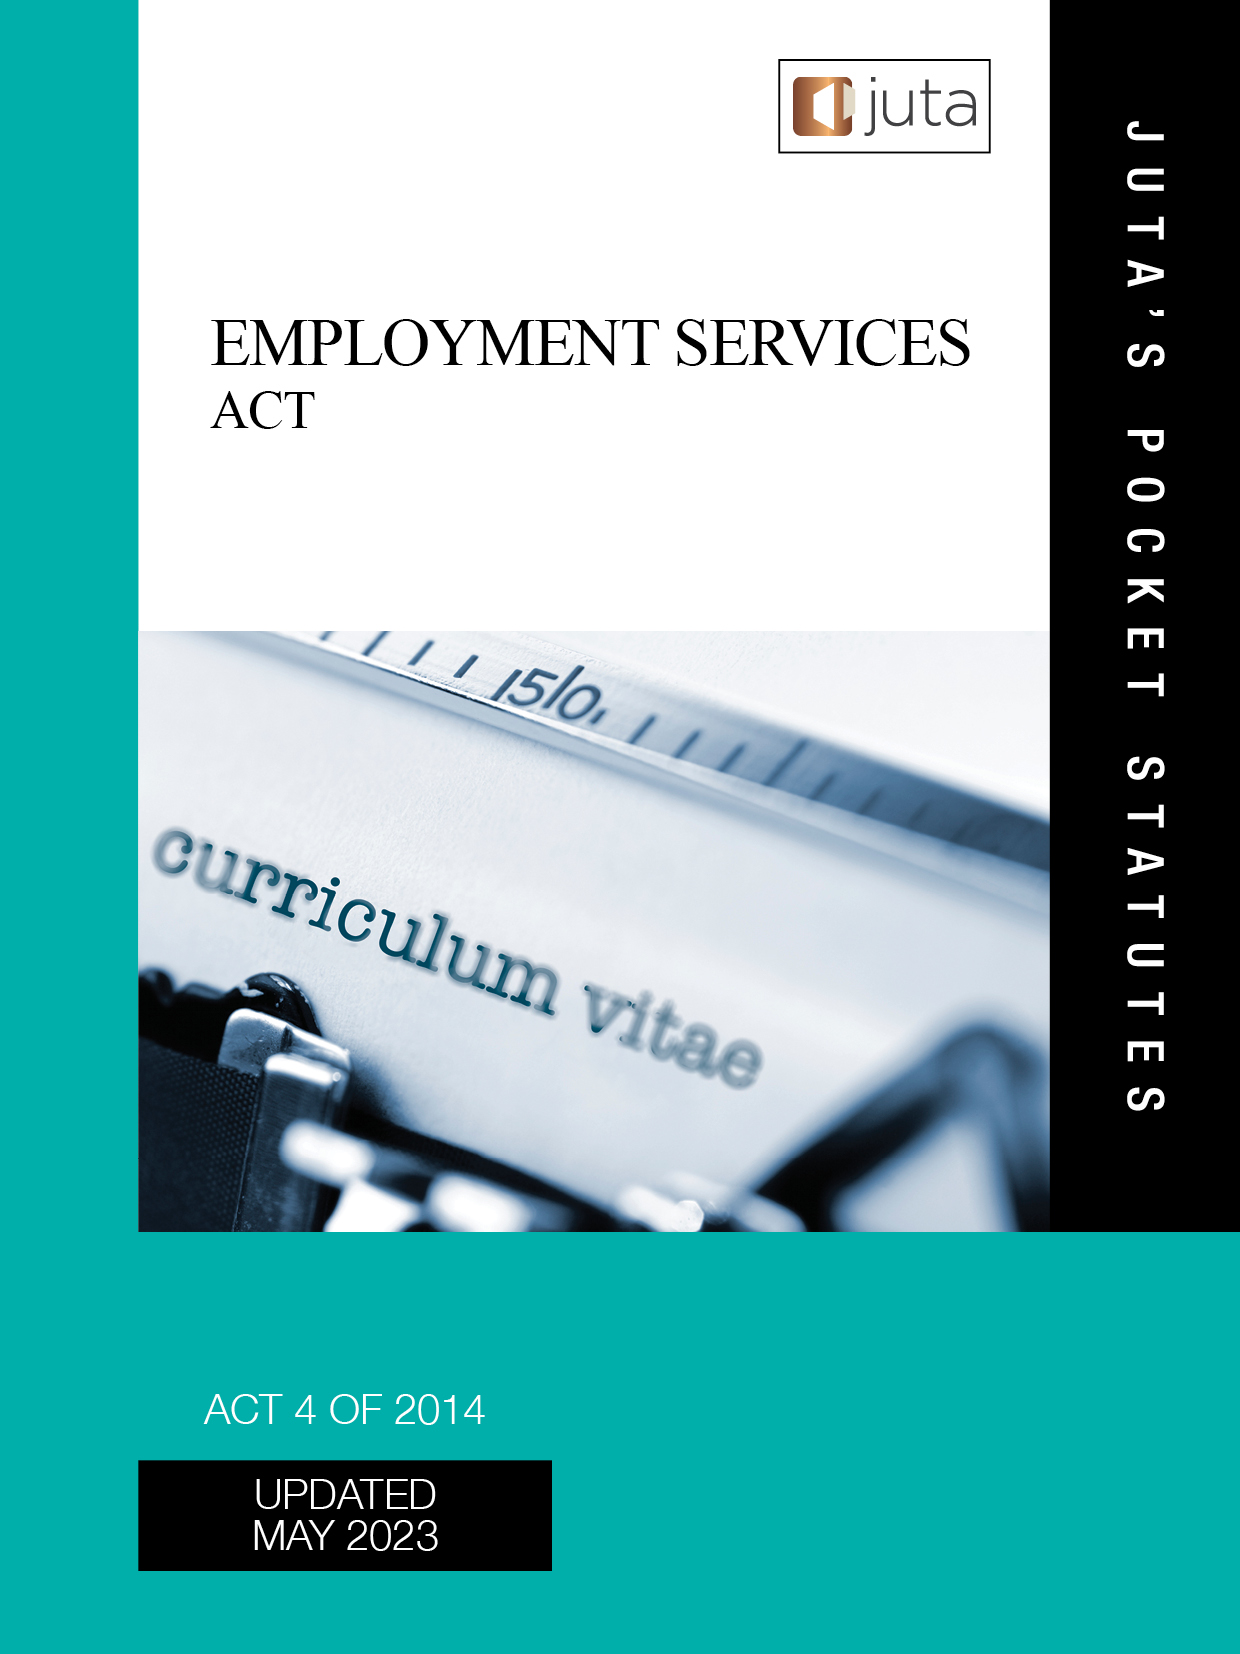 Employment Services Act 4 of 2014